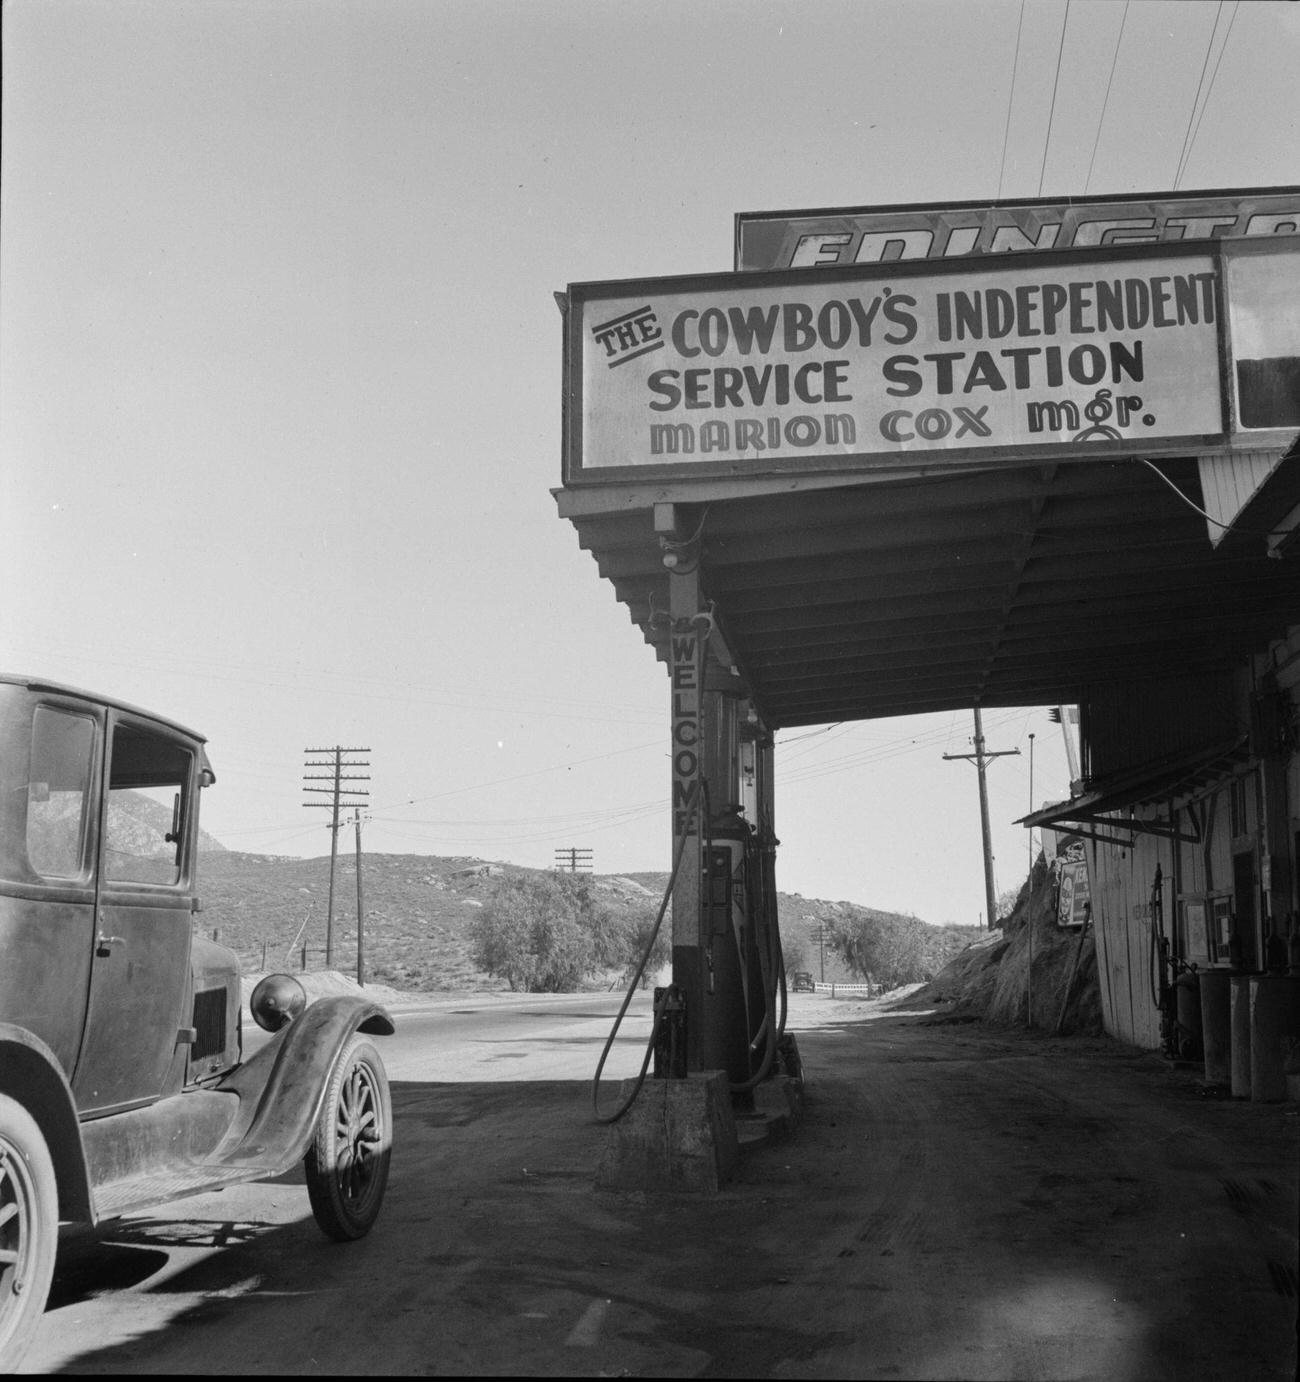 Riverside County Highway Scene Featuring Cowboy's Independent Service Station